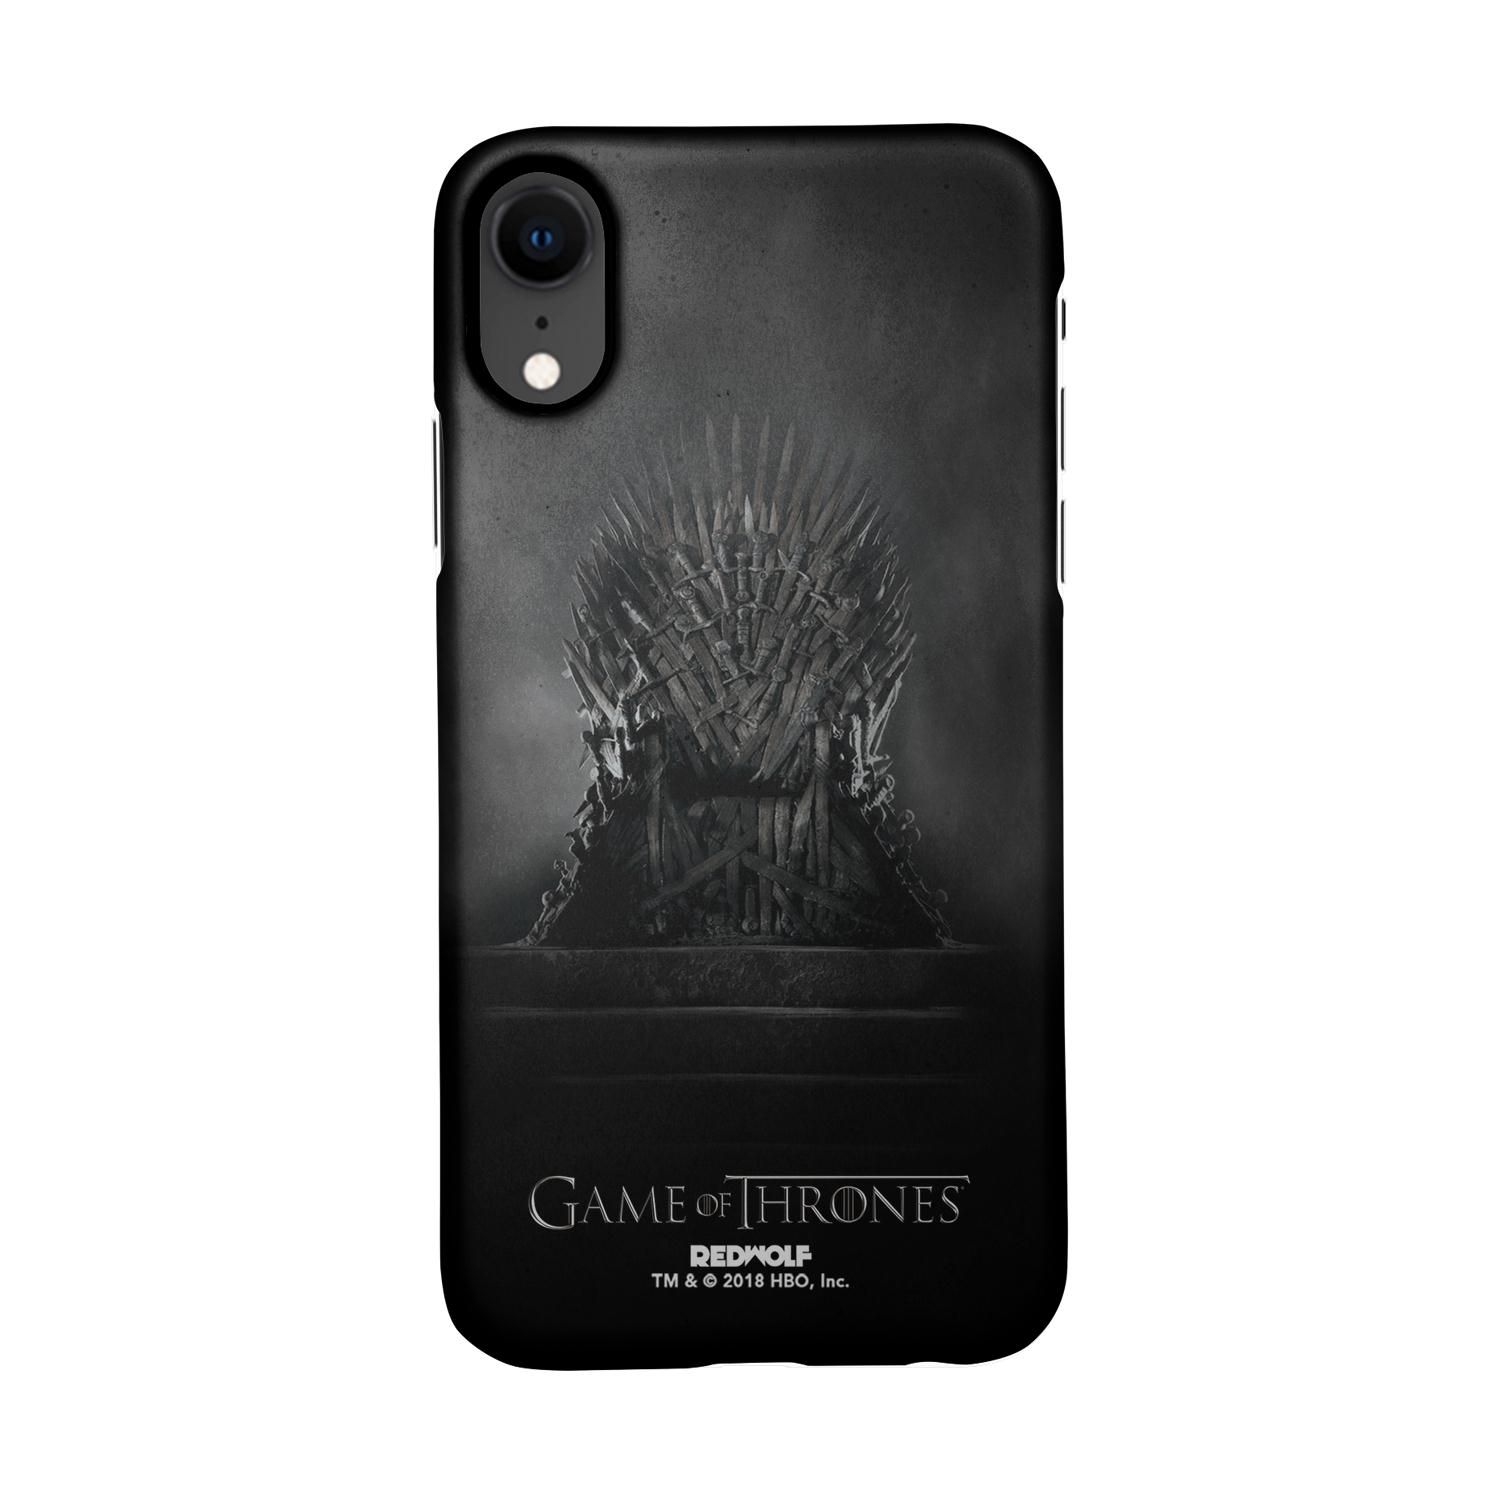 Buy The Throne - Sleek Phone Case for iPhone XR Online